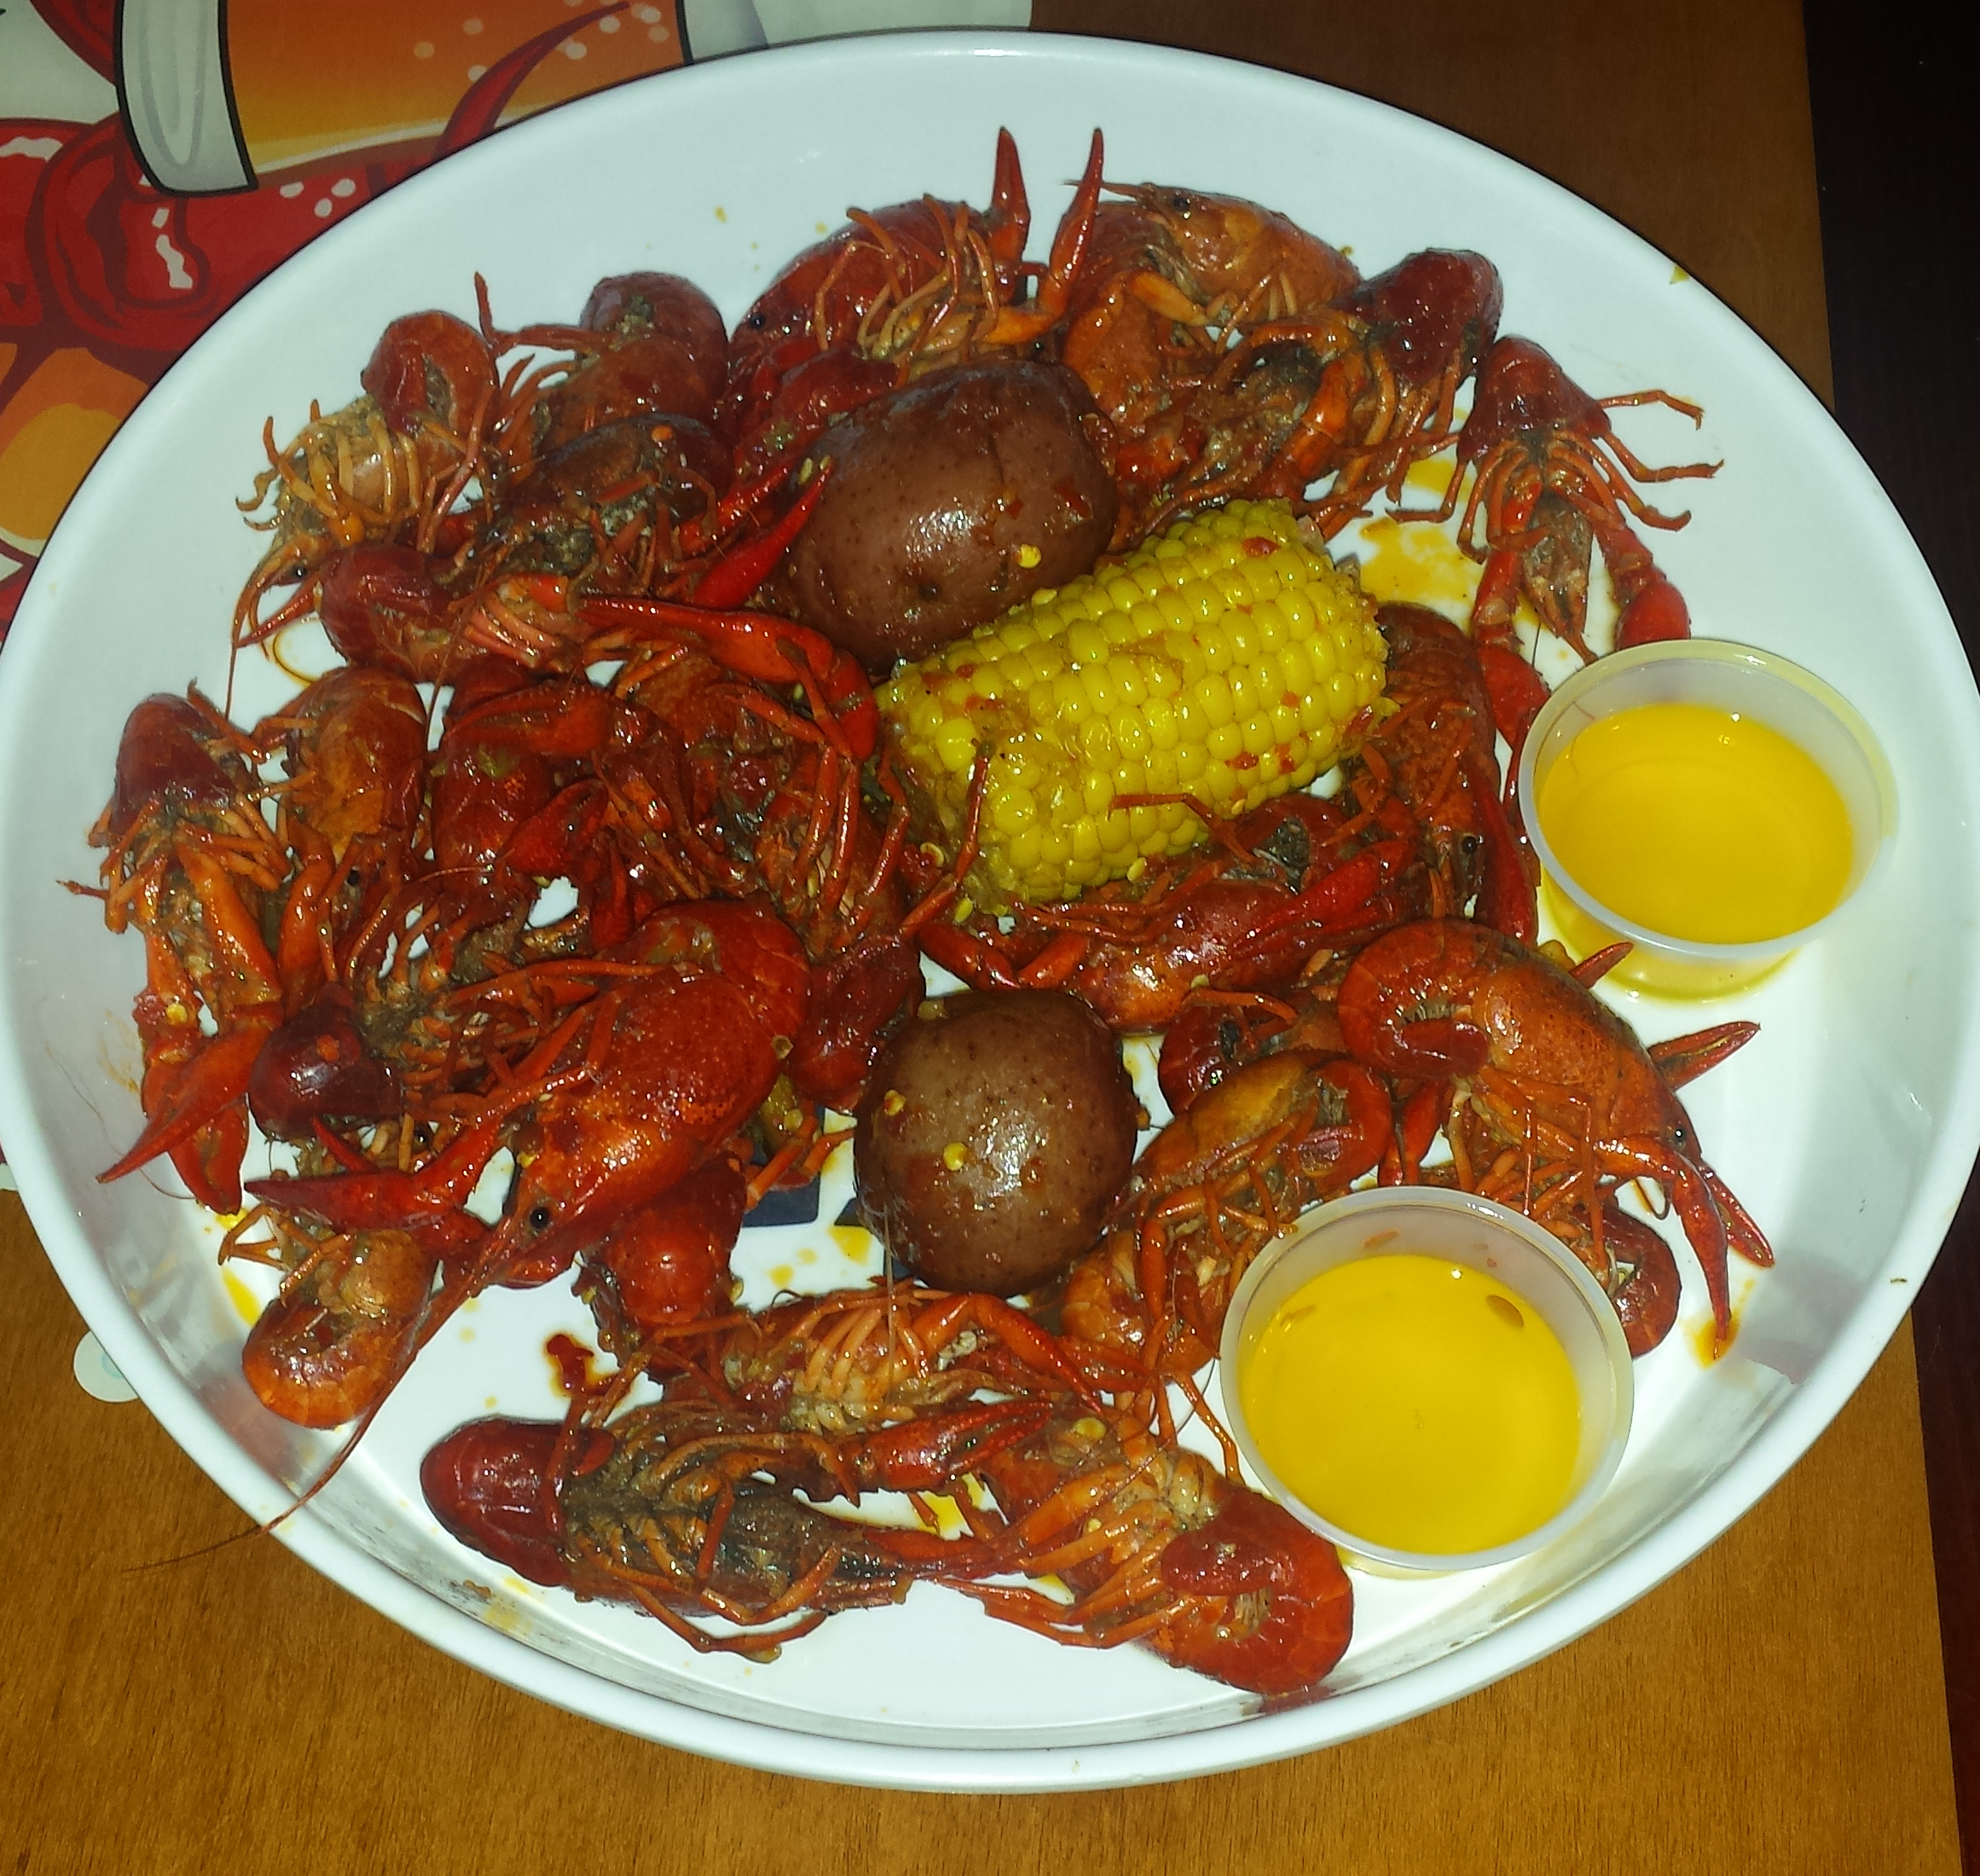 PHOTO: Spicy crawfish, melted butter, potatos, and corn are popular combinations for crawfish this season. Photo by The Signal reporter Aina Alleyne.